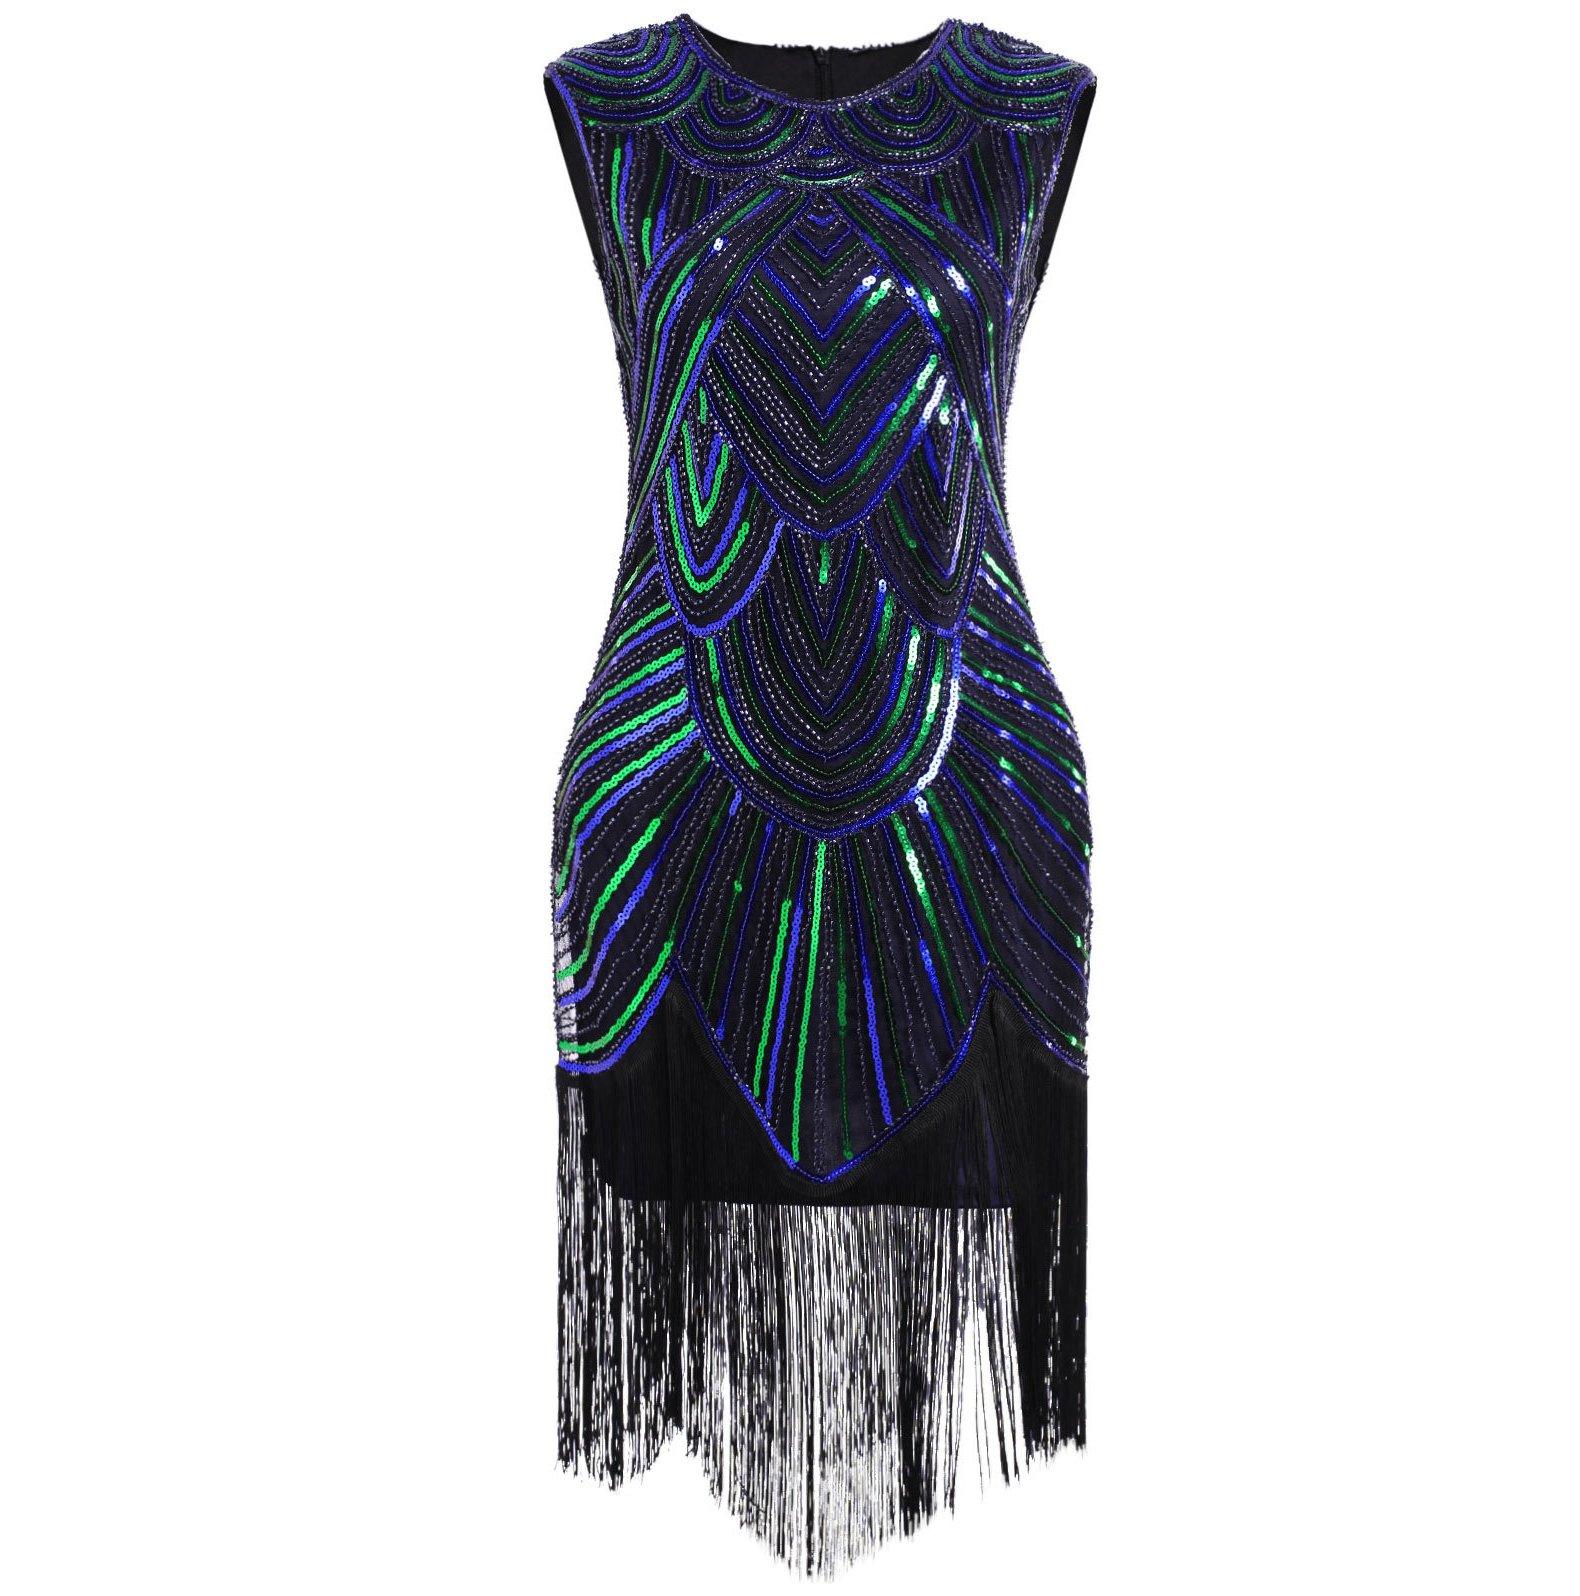 Beaded Fringed Gatsby 1920s Flapper Dress Prom Party